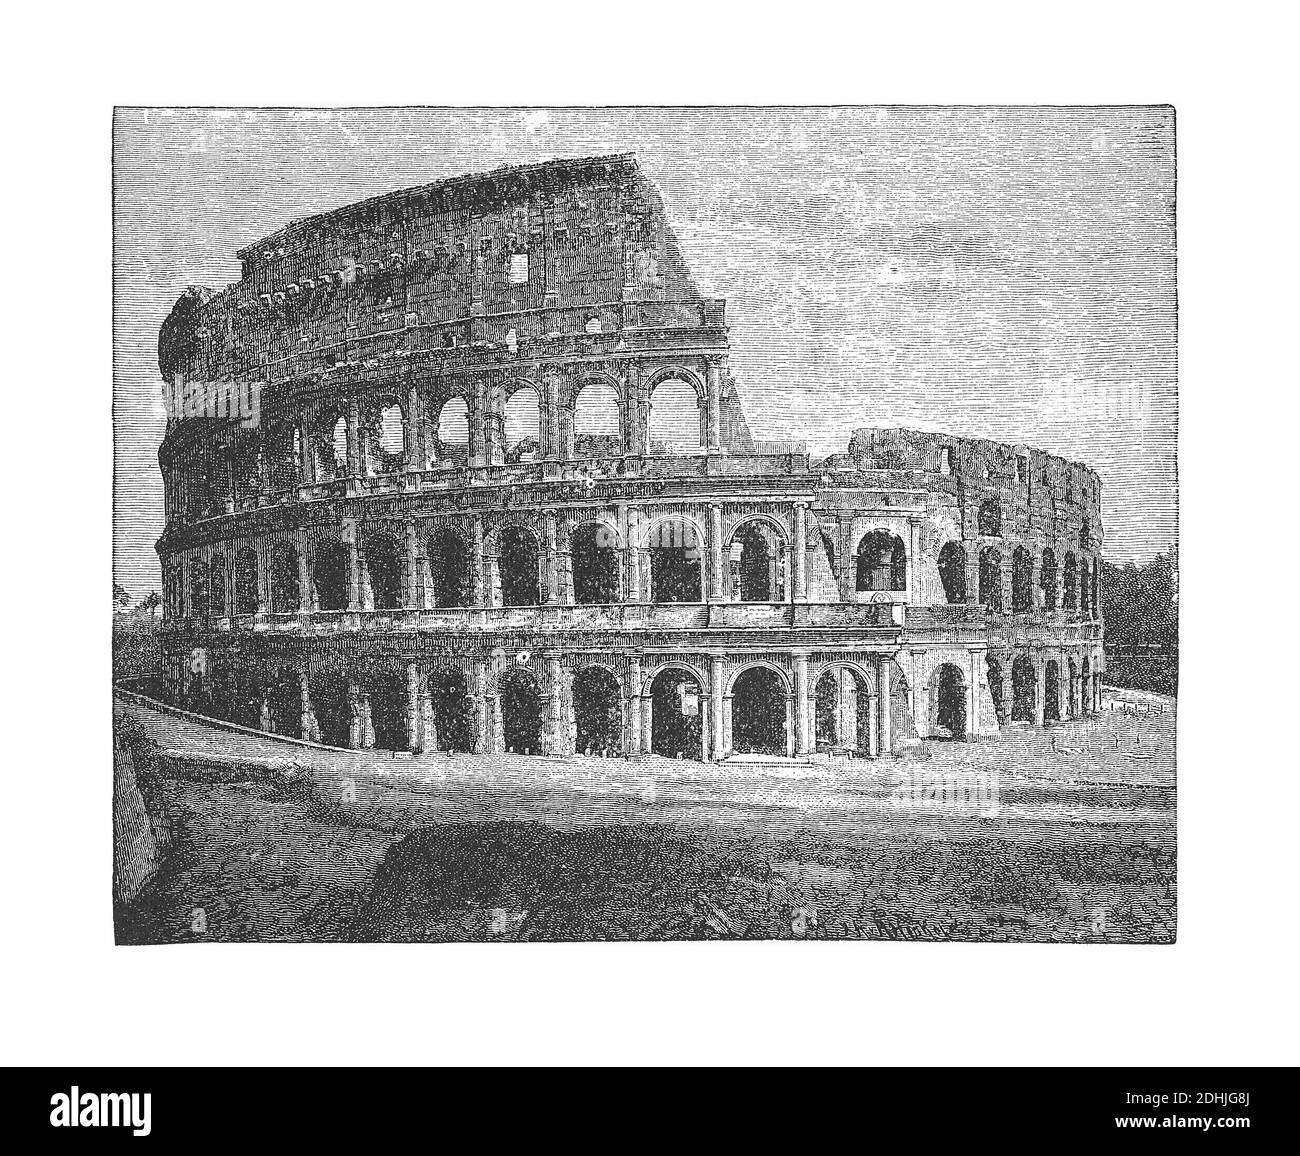 Original artwork of Colosseum, Rome, Italy. Published in A pictorial history of the world's great nations: from the earliest dates to the present time Stock Photo